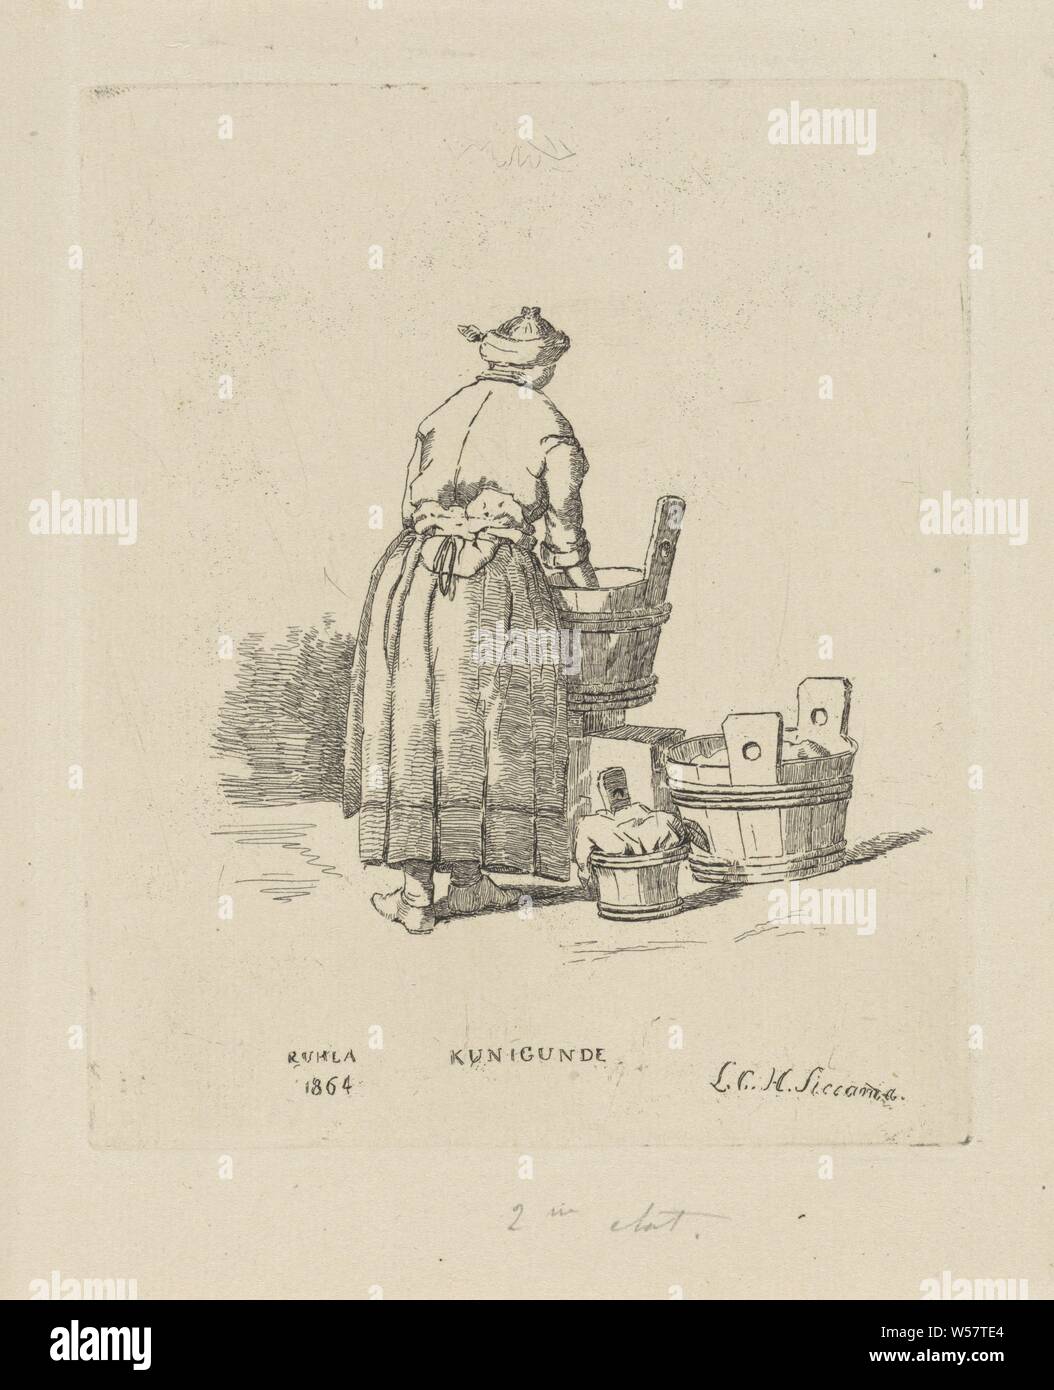 Laundress Kunigunde (title on object), A woman does the laundry in a large tub. A second tub stands on the floor next to her. In addition, a smaller tub with laundry, wash house, home laundry, laundry room, Louis Charles Hora Siccama (mentioned on object), Utrecht, 1864, paper, etching, h 146 mm × w 120 mm Stock Photo